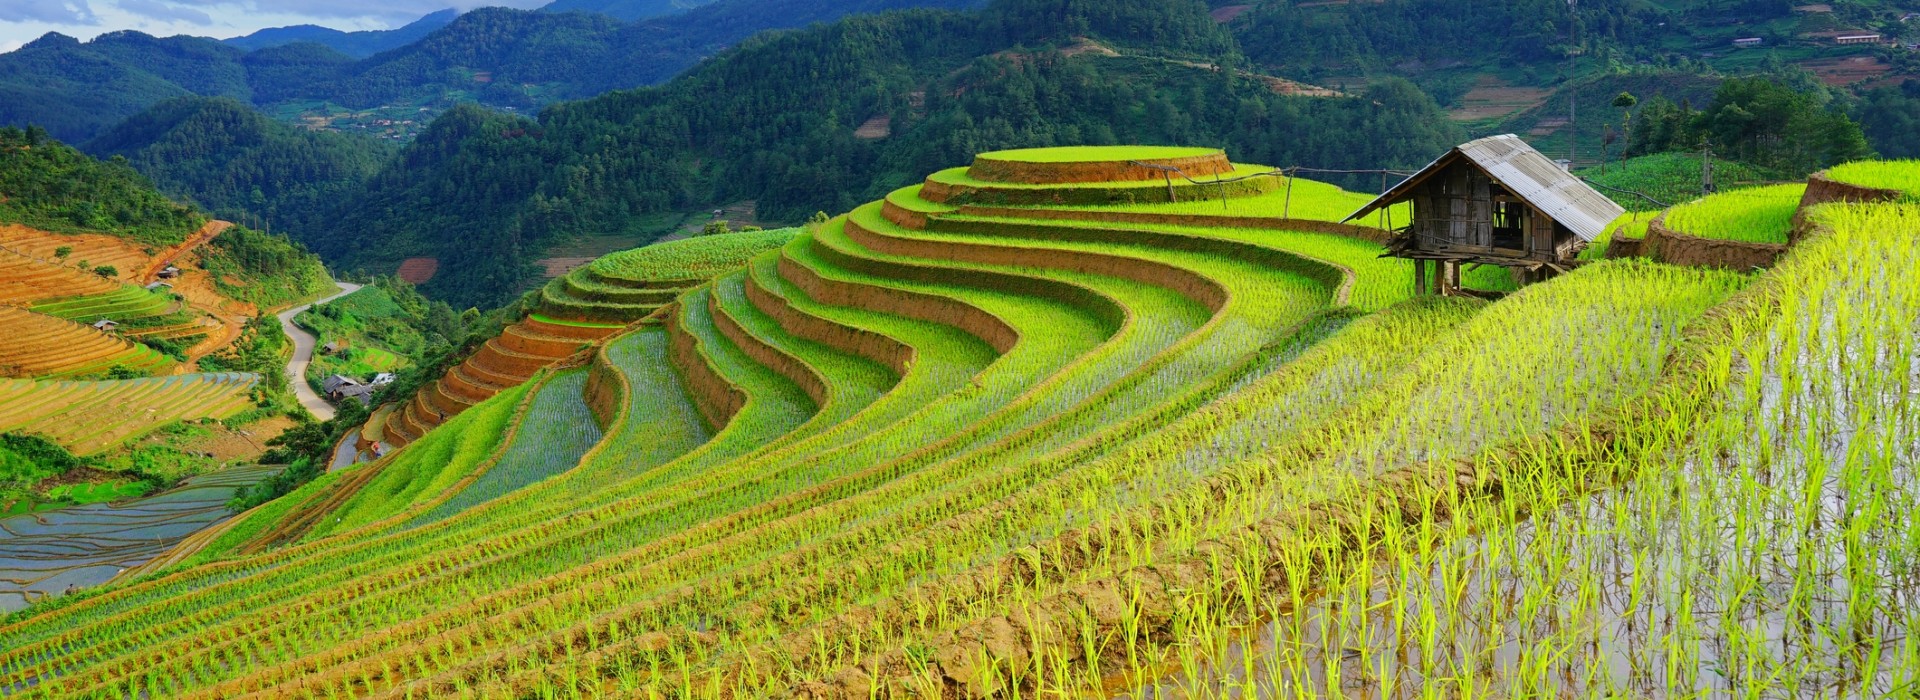 Sapa The Best Place For Trekking In Vietnam